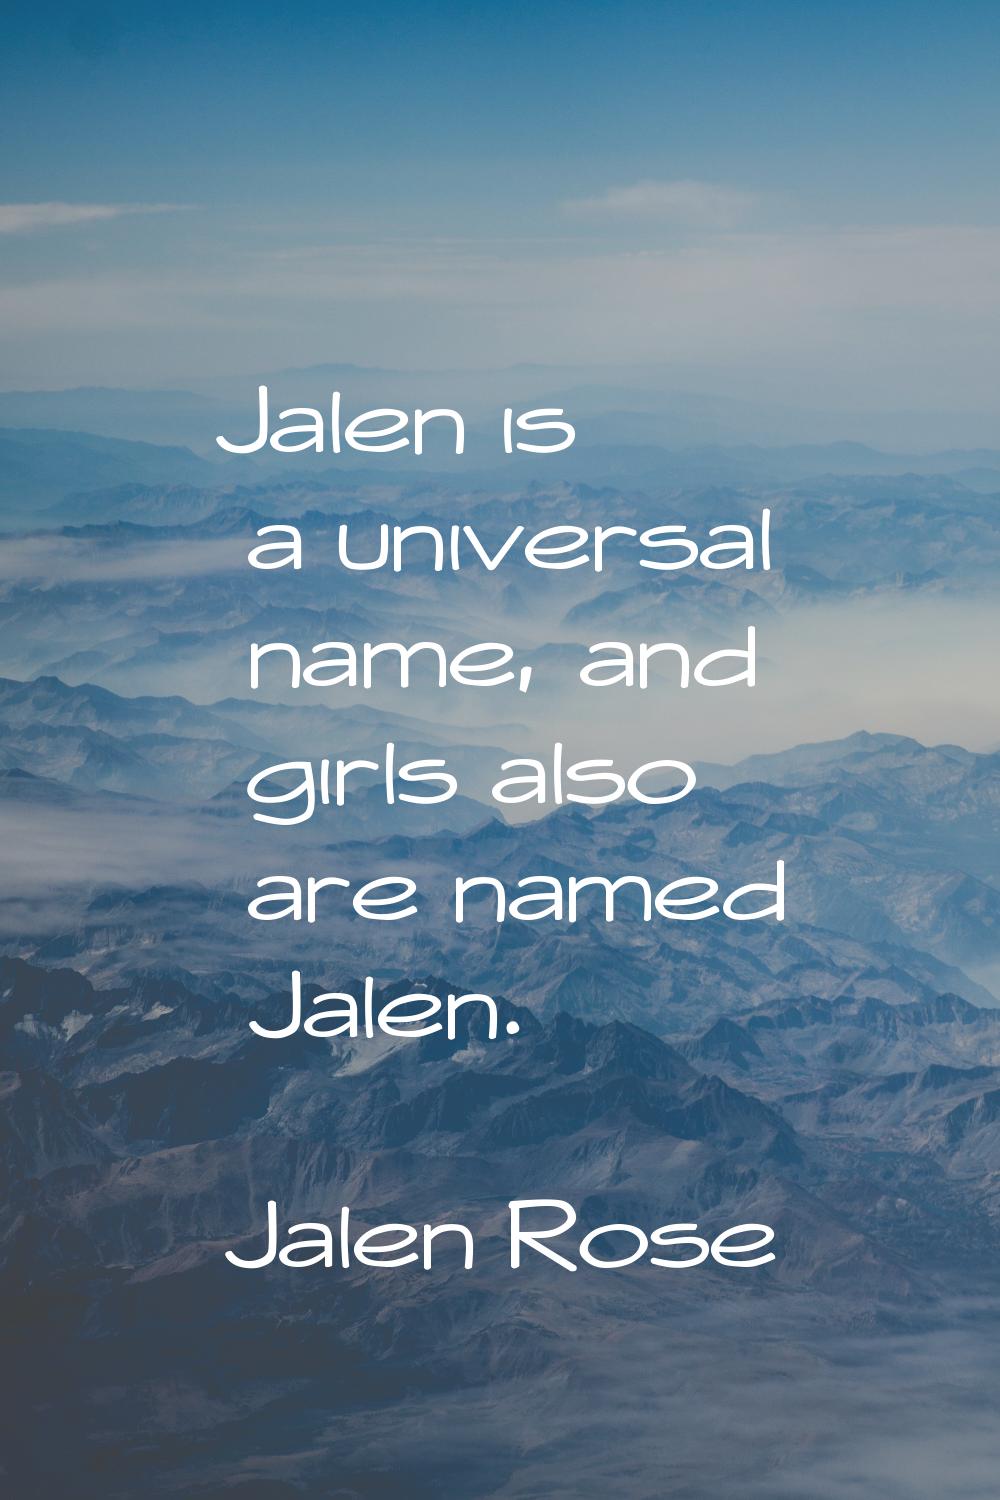 Jalen is a universal name, and girls also are named Jalen.